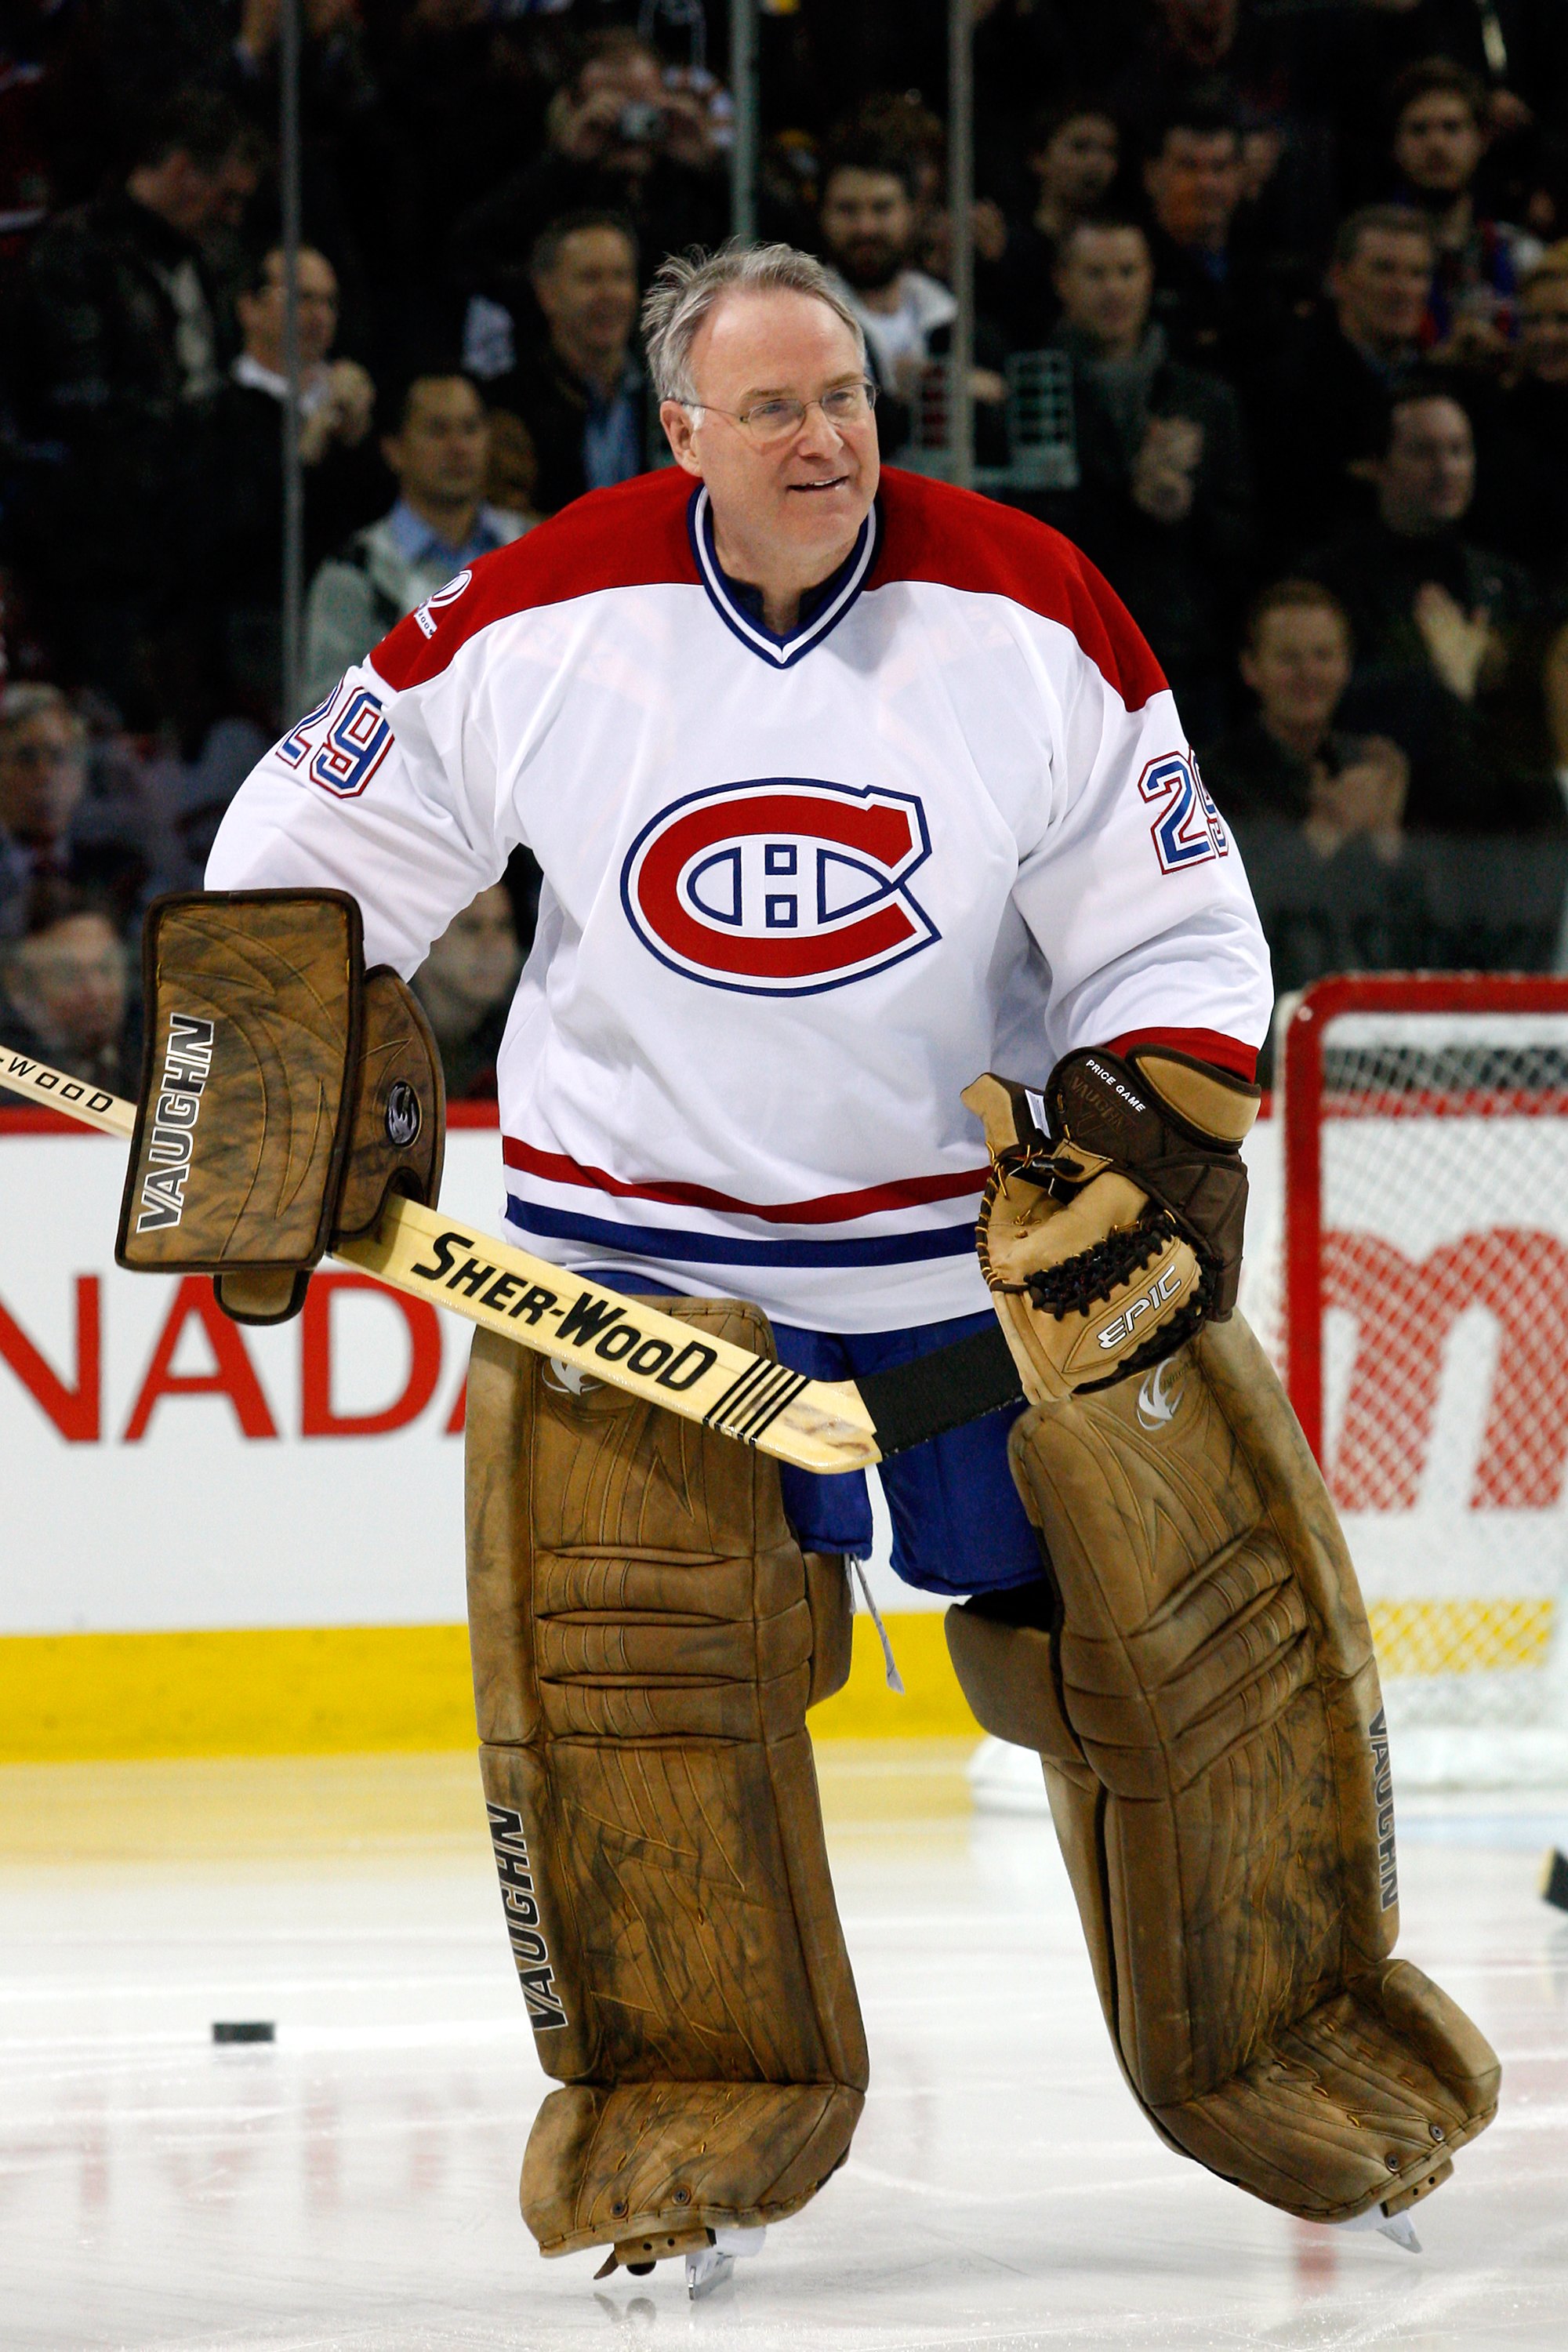 MONTREAL- DECEMBER 4:  Former Montreal Canadien Ken Dryden skates during the Centennial Celebration ceremonies prior to the NHL game between the Montreal Canadiens and Boston Bruins on December 4, 2009 at the Bell Centre in Montreal, Quebec, Canada.  The